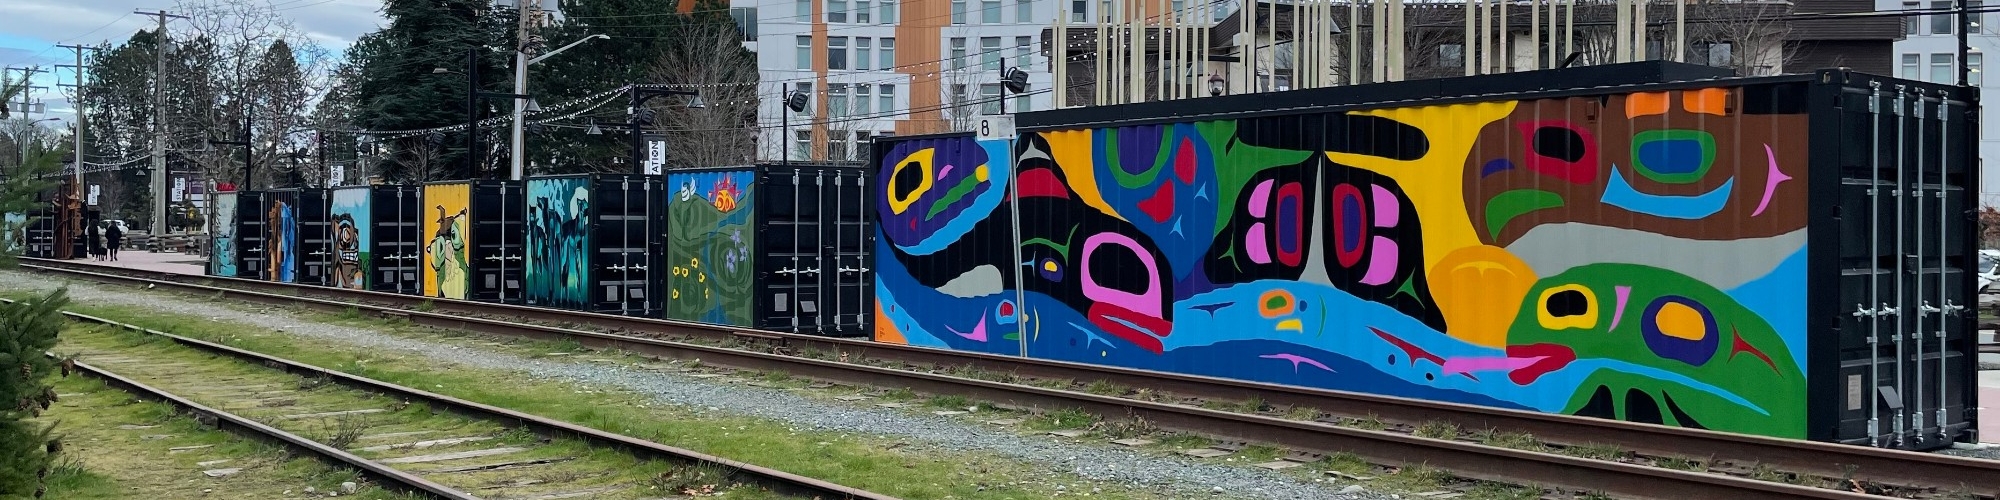 train tracks and Indigenous mural in Langford, Victoria B.C. as background for Contact page